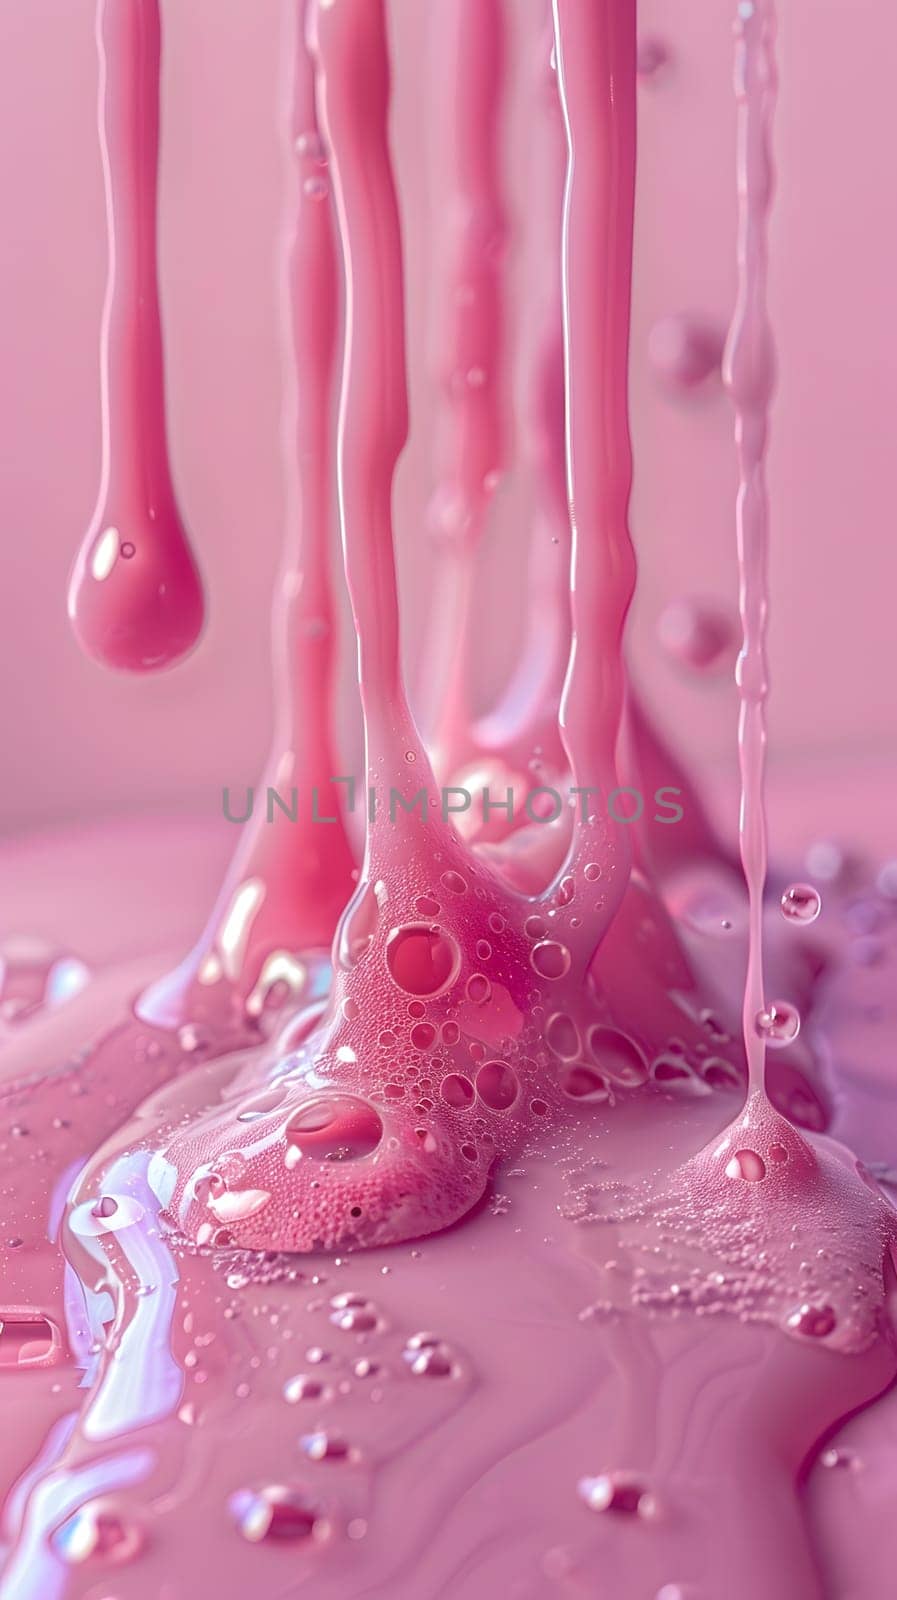 Close up of pink liquid dripping onto a pink surface, resembling a fluid art masterpiece. The colors merge beautifully, creating a stunning visual display